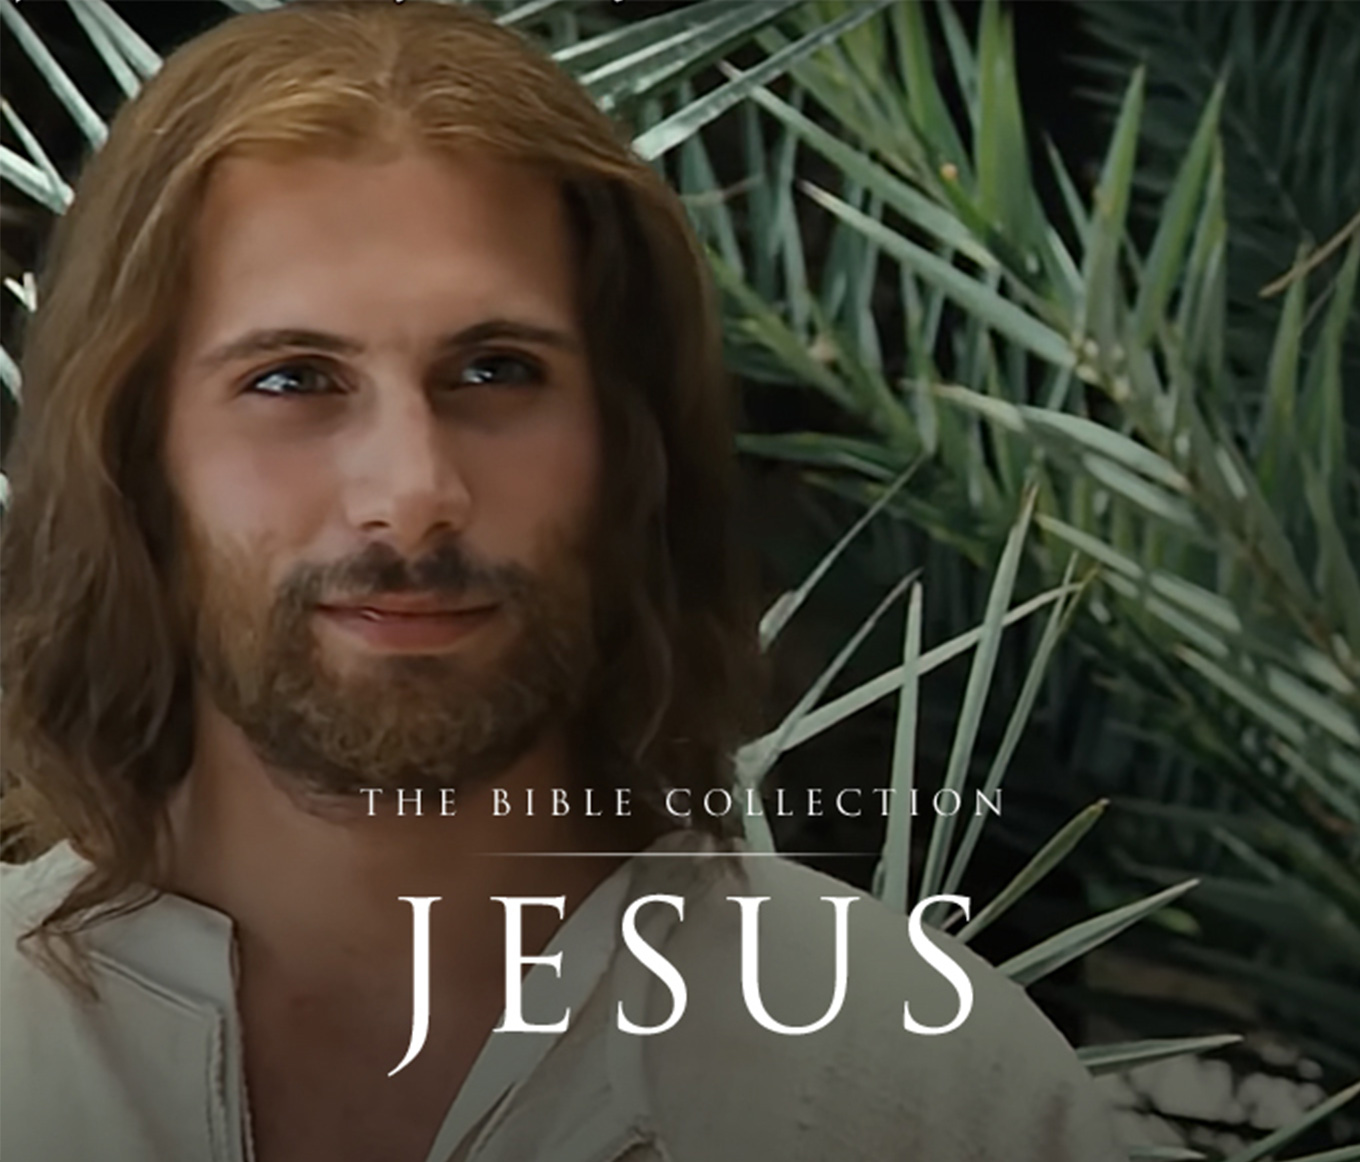 The Bible Collection: Jesus movie poster